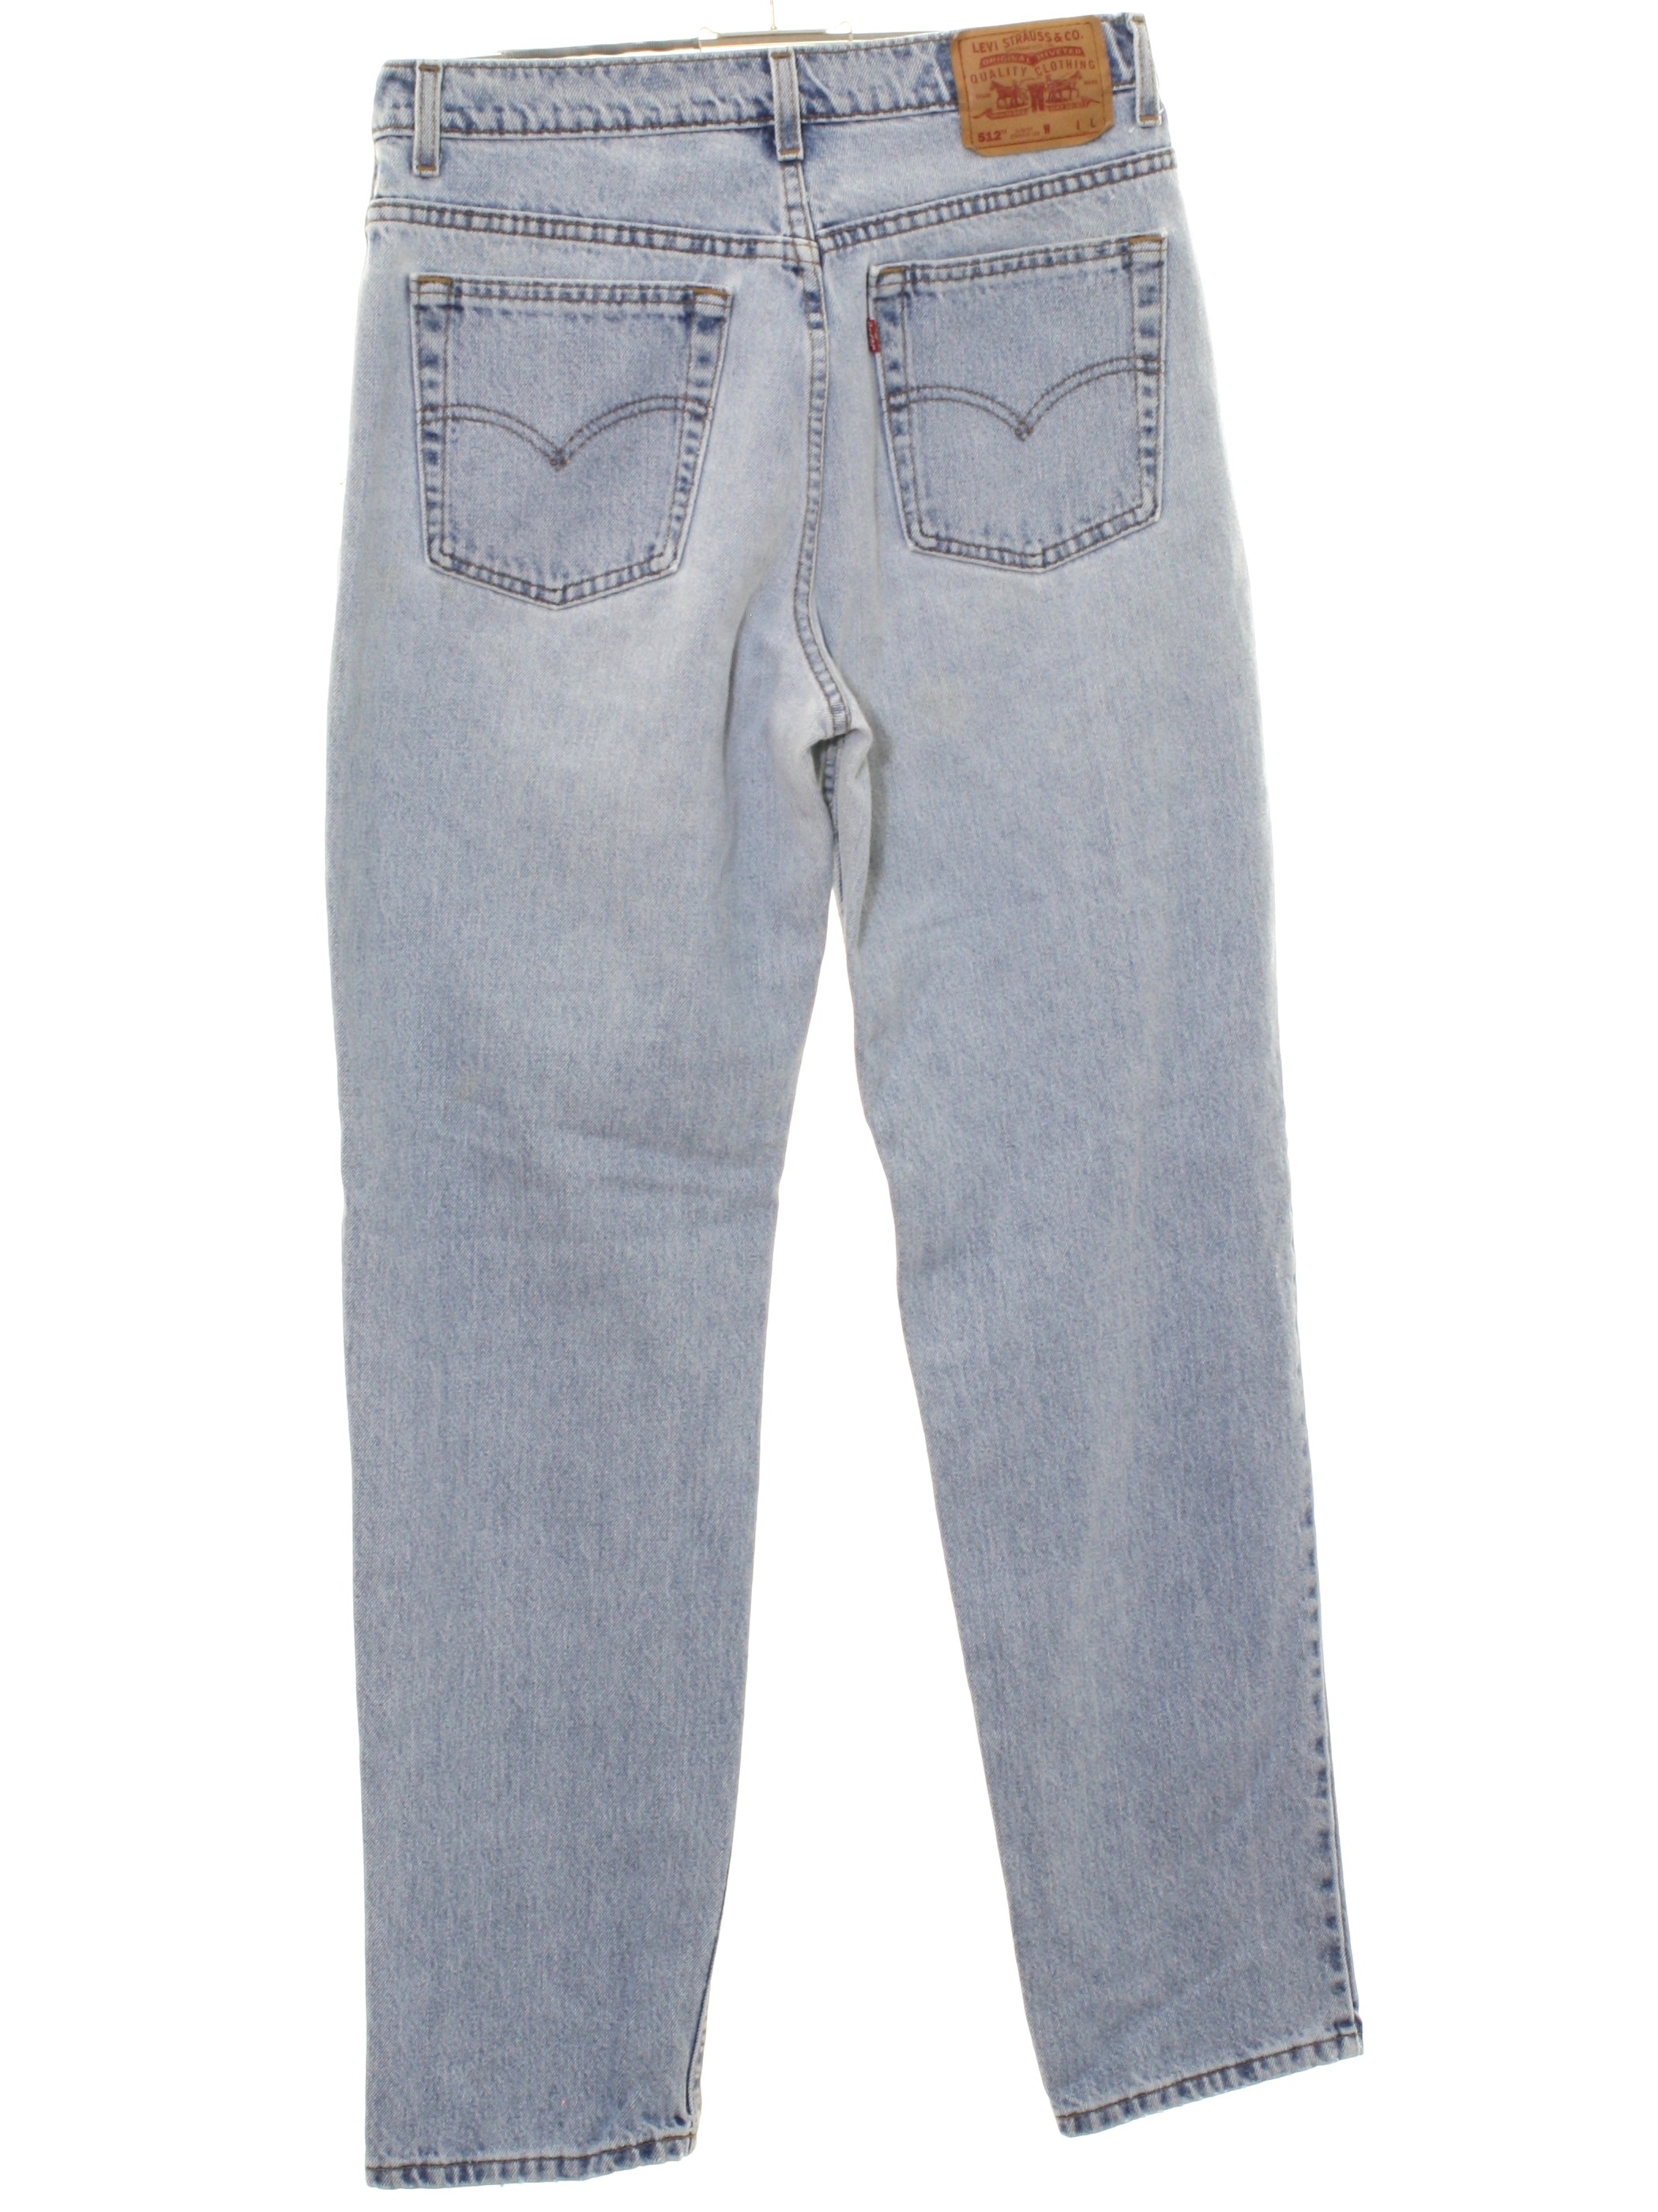 levis 521 high waisted jeans